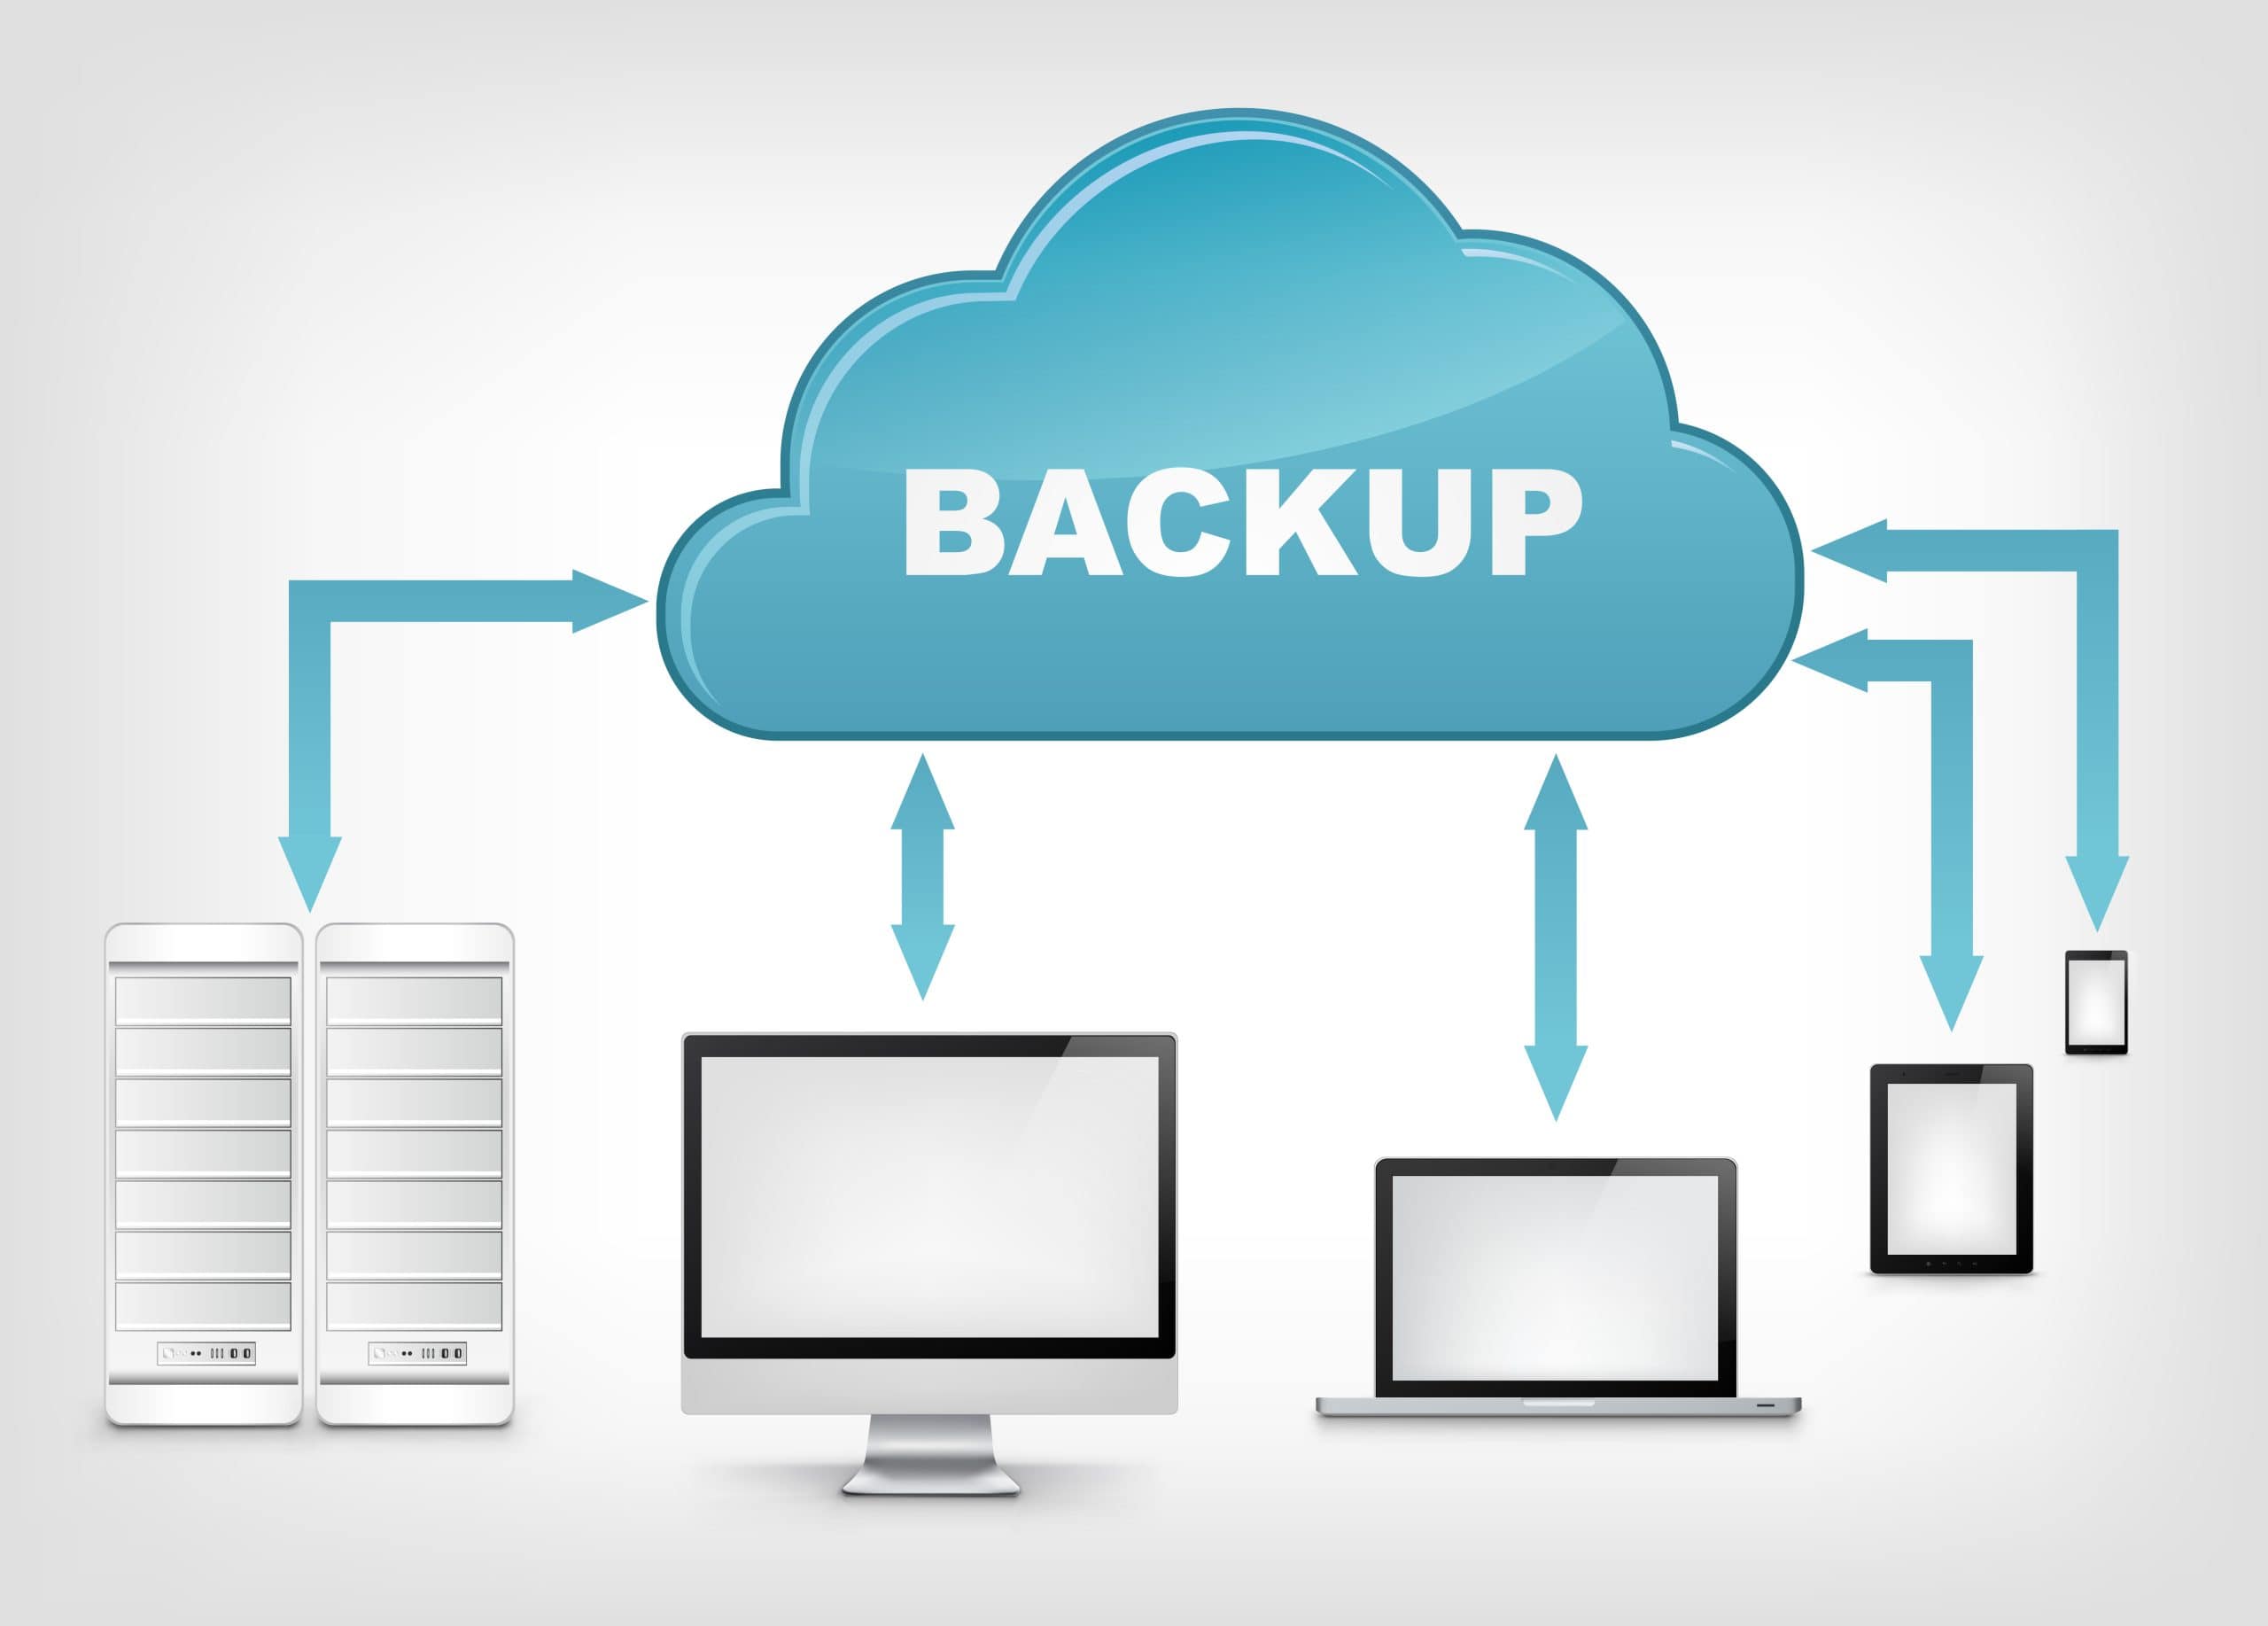 Image representing a cloud data backup solution